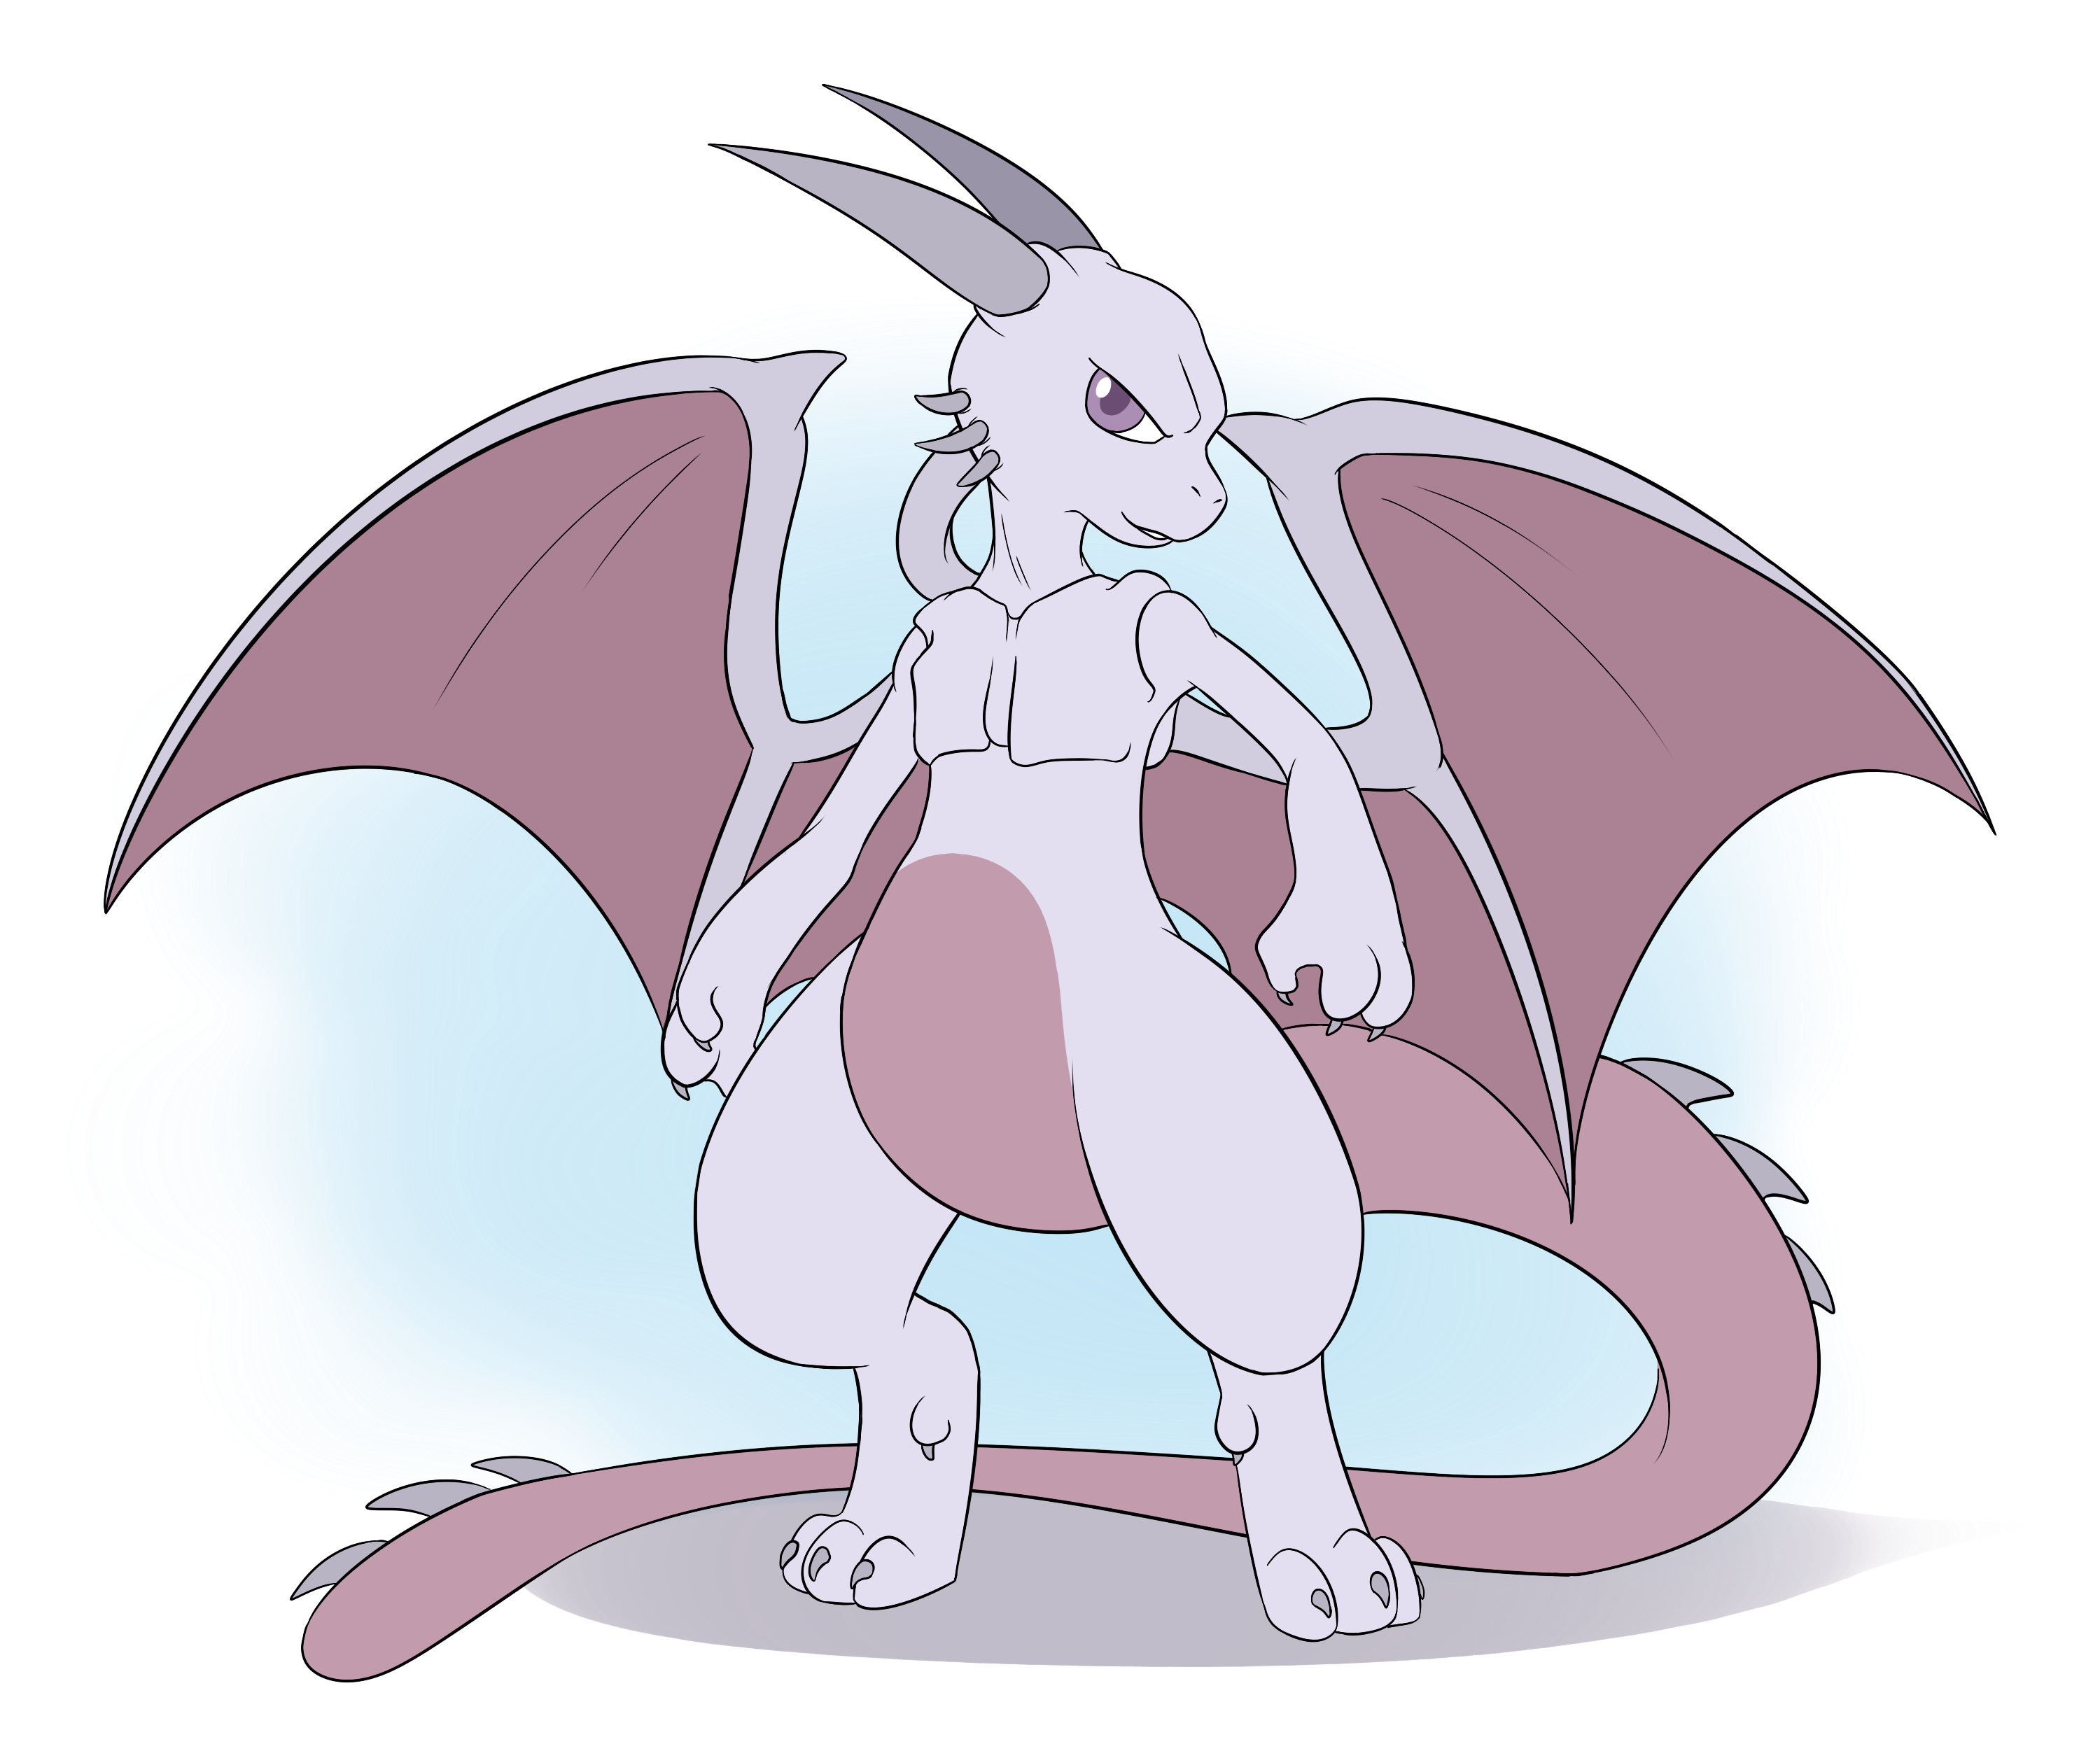 patreon_dragonmewtwo_sfw_by_misterartmaster101-dbc885o.png